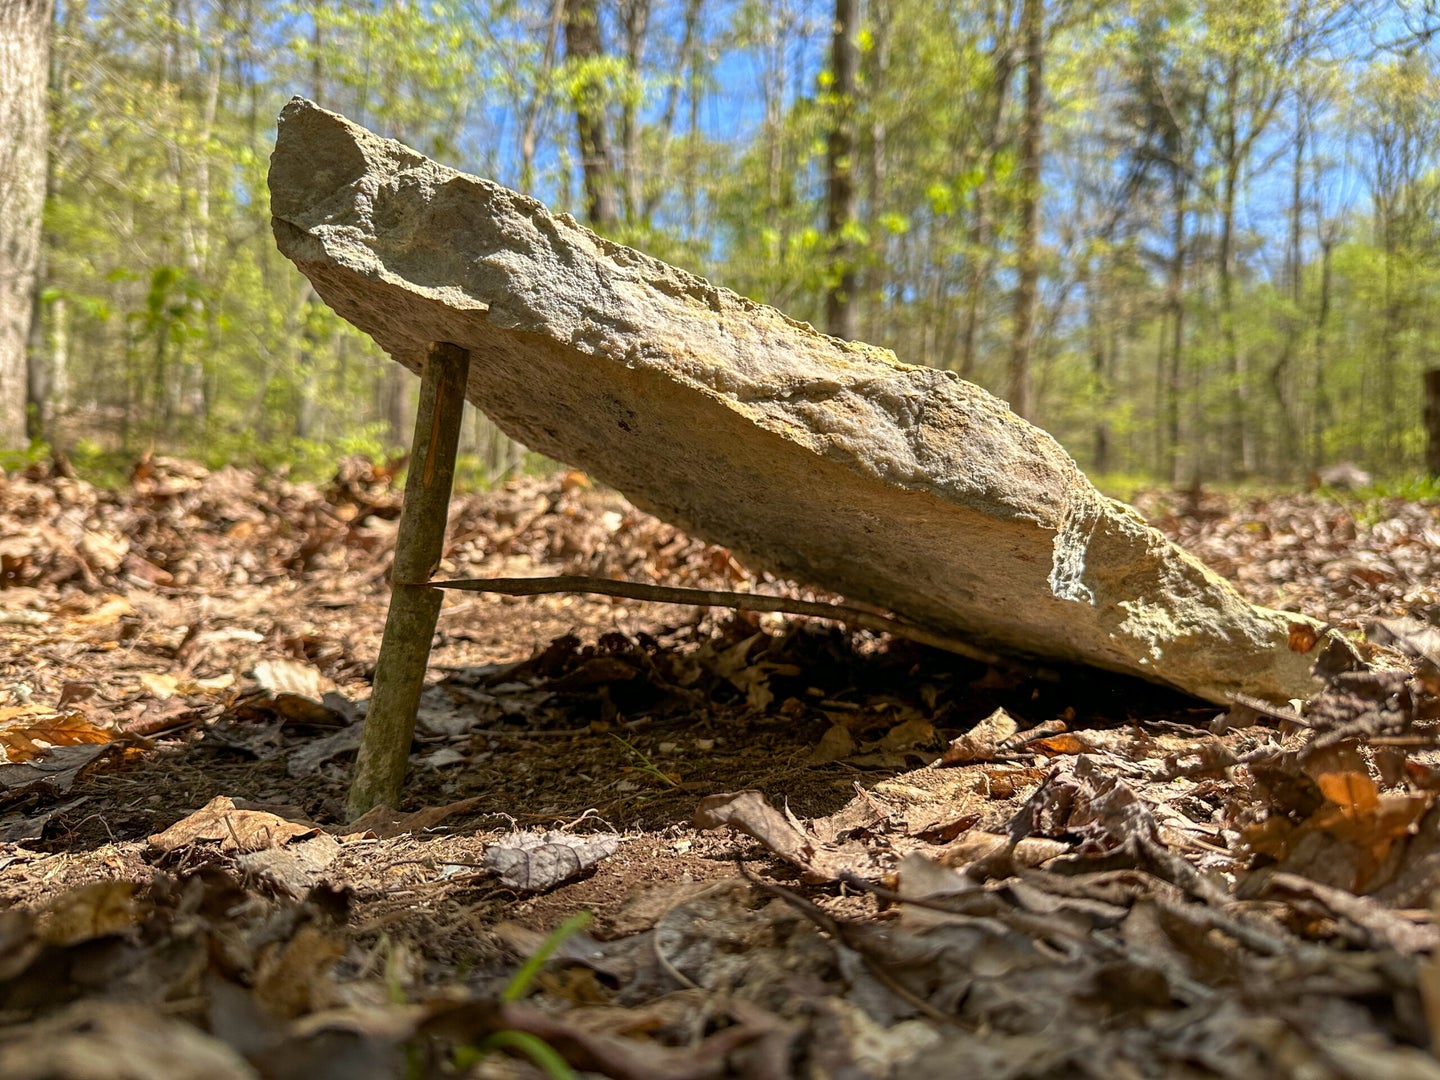 A rock being held up by stick to be used as a deadfall trap